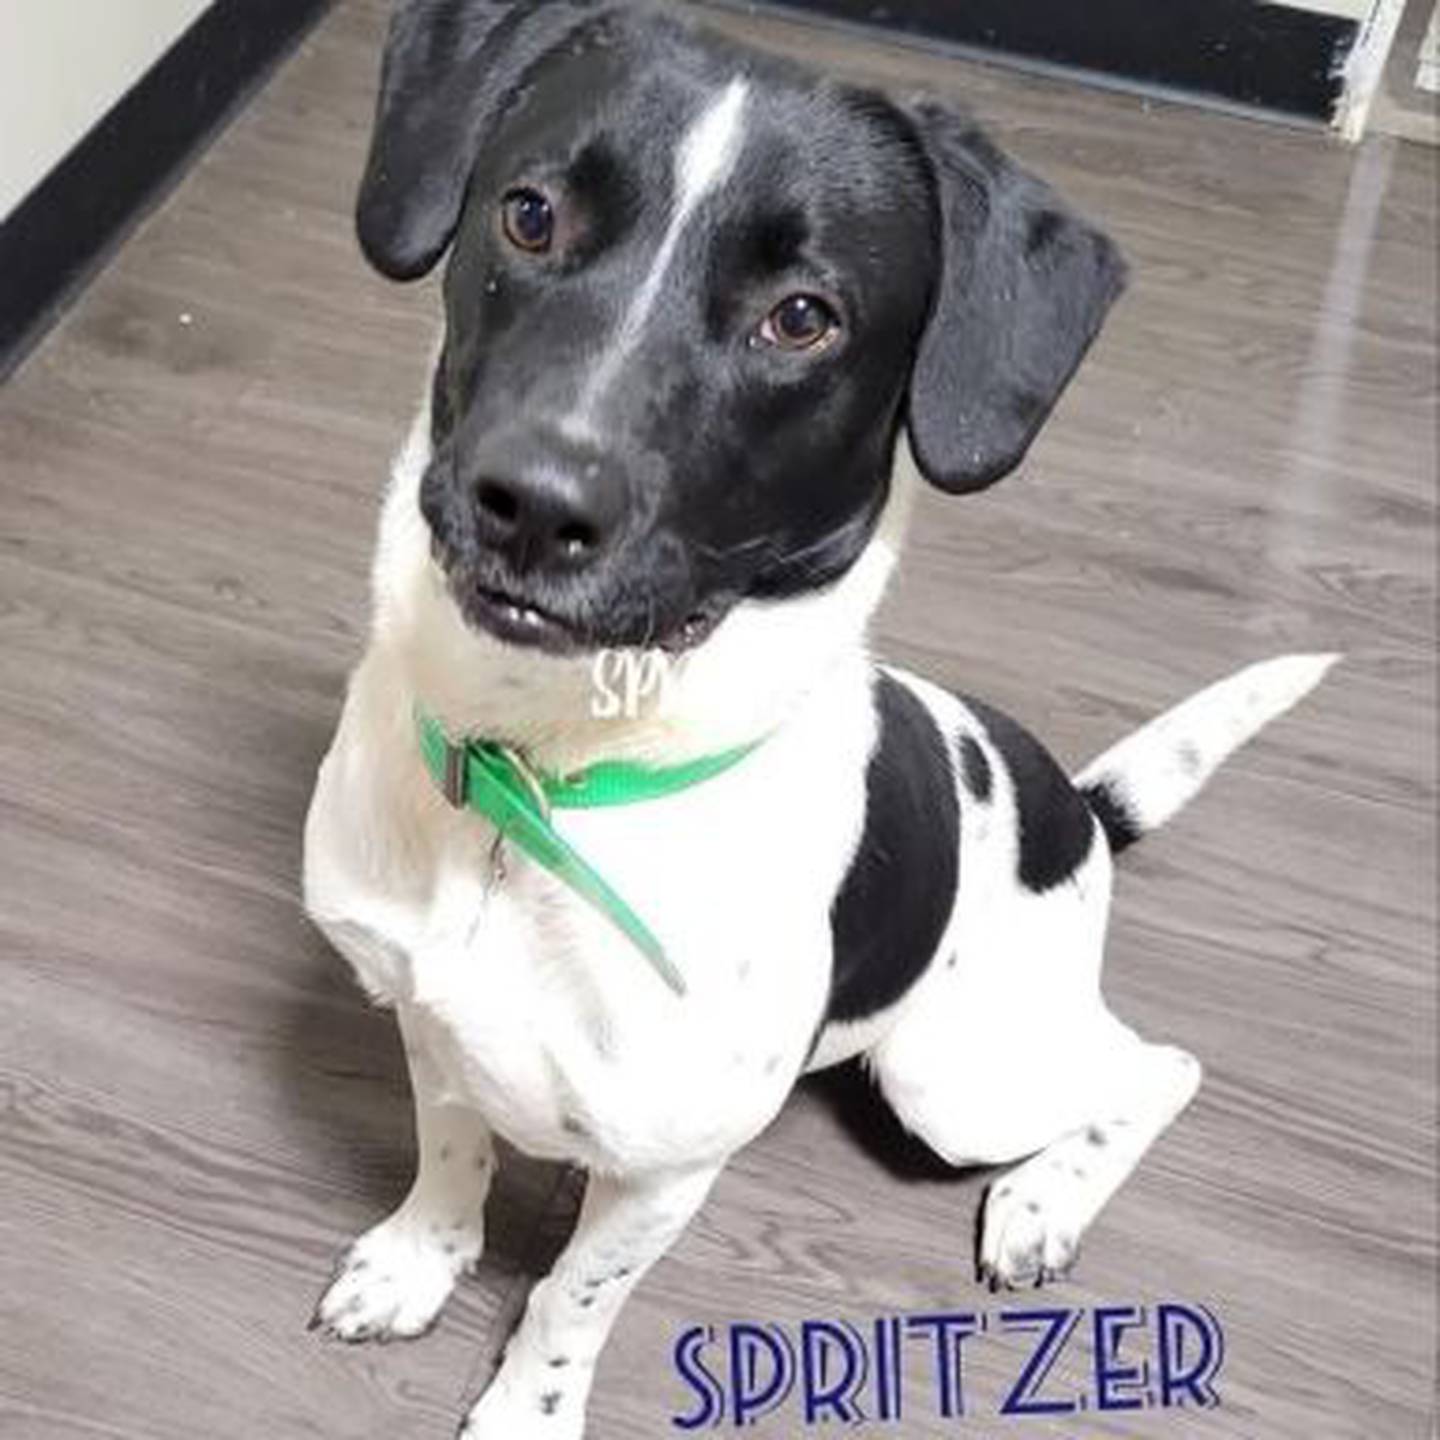 Spritzer is 2 years old and weighs 42 pounds. He is very smart and his tail never stops wagging. He just aims to please. To meet Spritzer, contact Hopeful Tails Animal Rescue at hopefultailsadoptions@outlook.com. Visit hopefultailsanimalrescue.org.